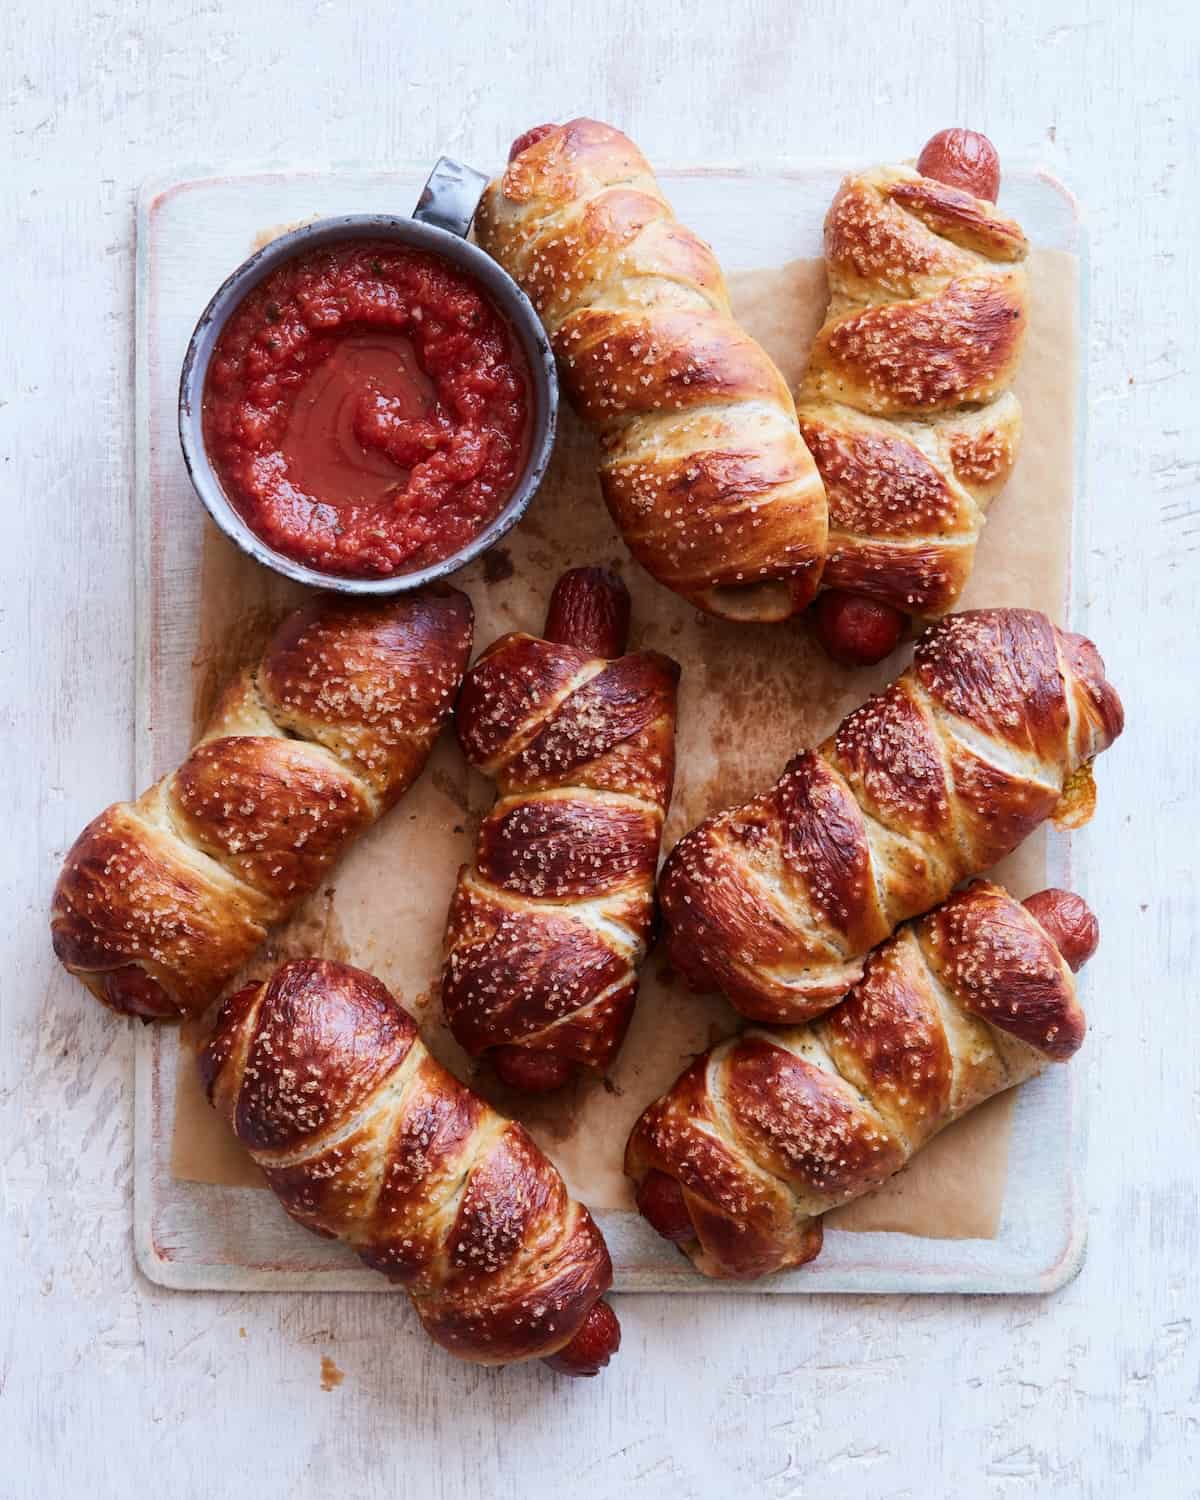 Seven pretzel dogs and a small bowl of marinara sauce for dipping placed on a parchment paper lined board.